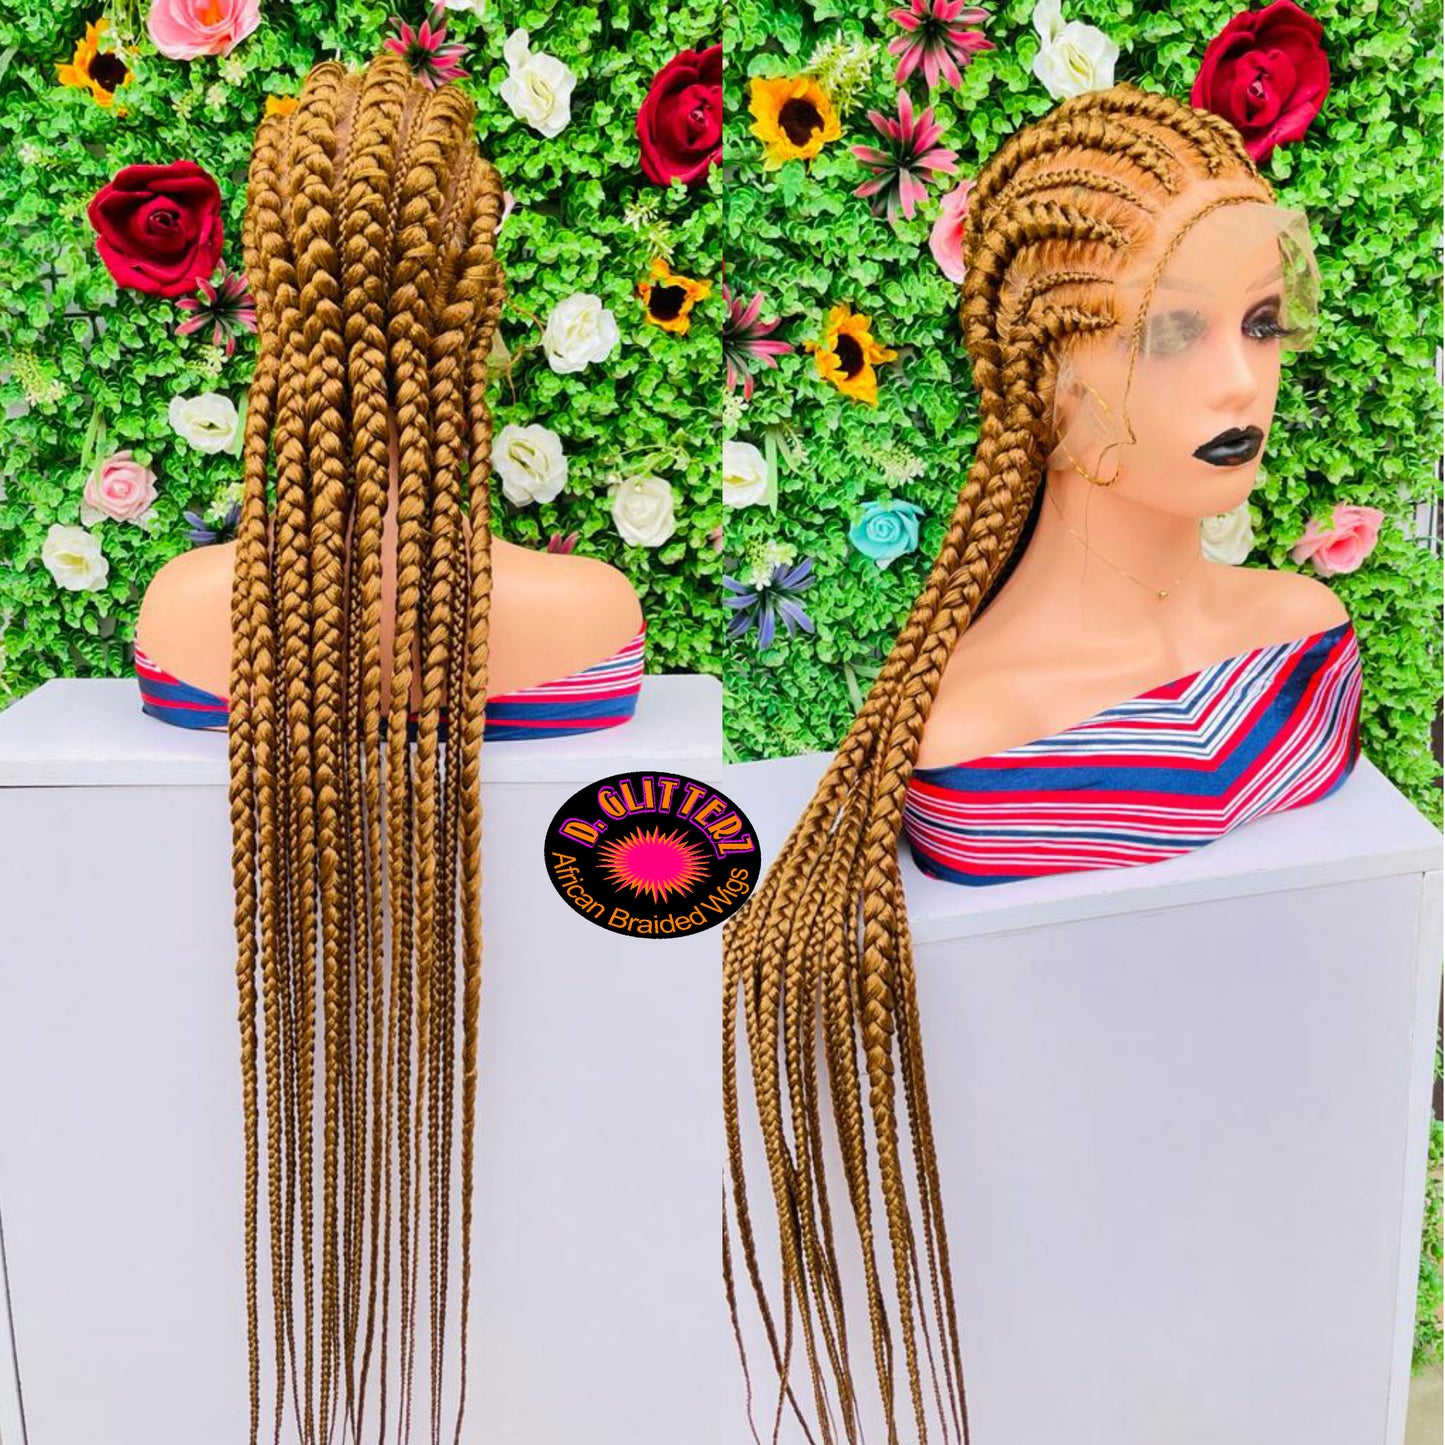 STITCHES ALL BACK BRAIDED WIGS ON FULL LACE CLOSURE 45"